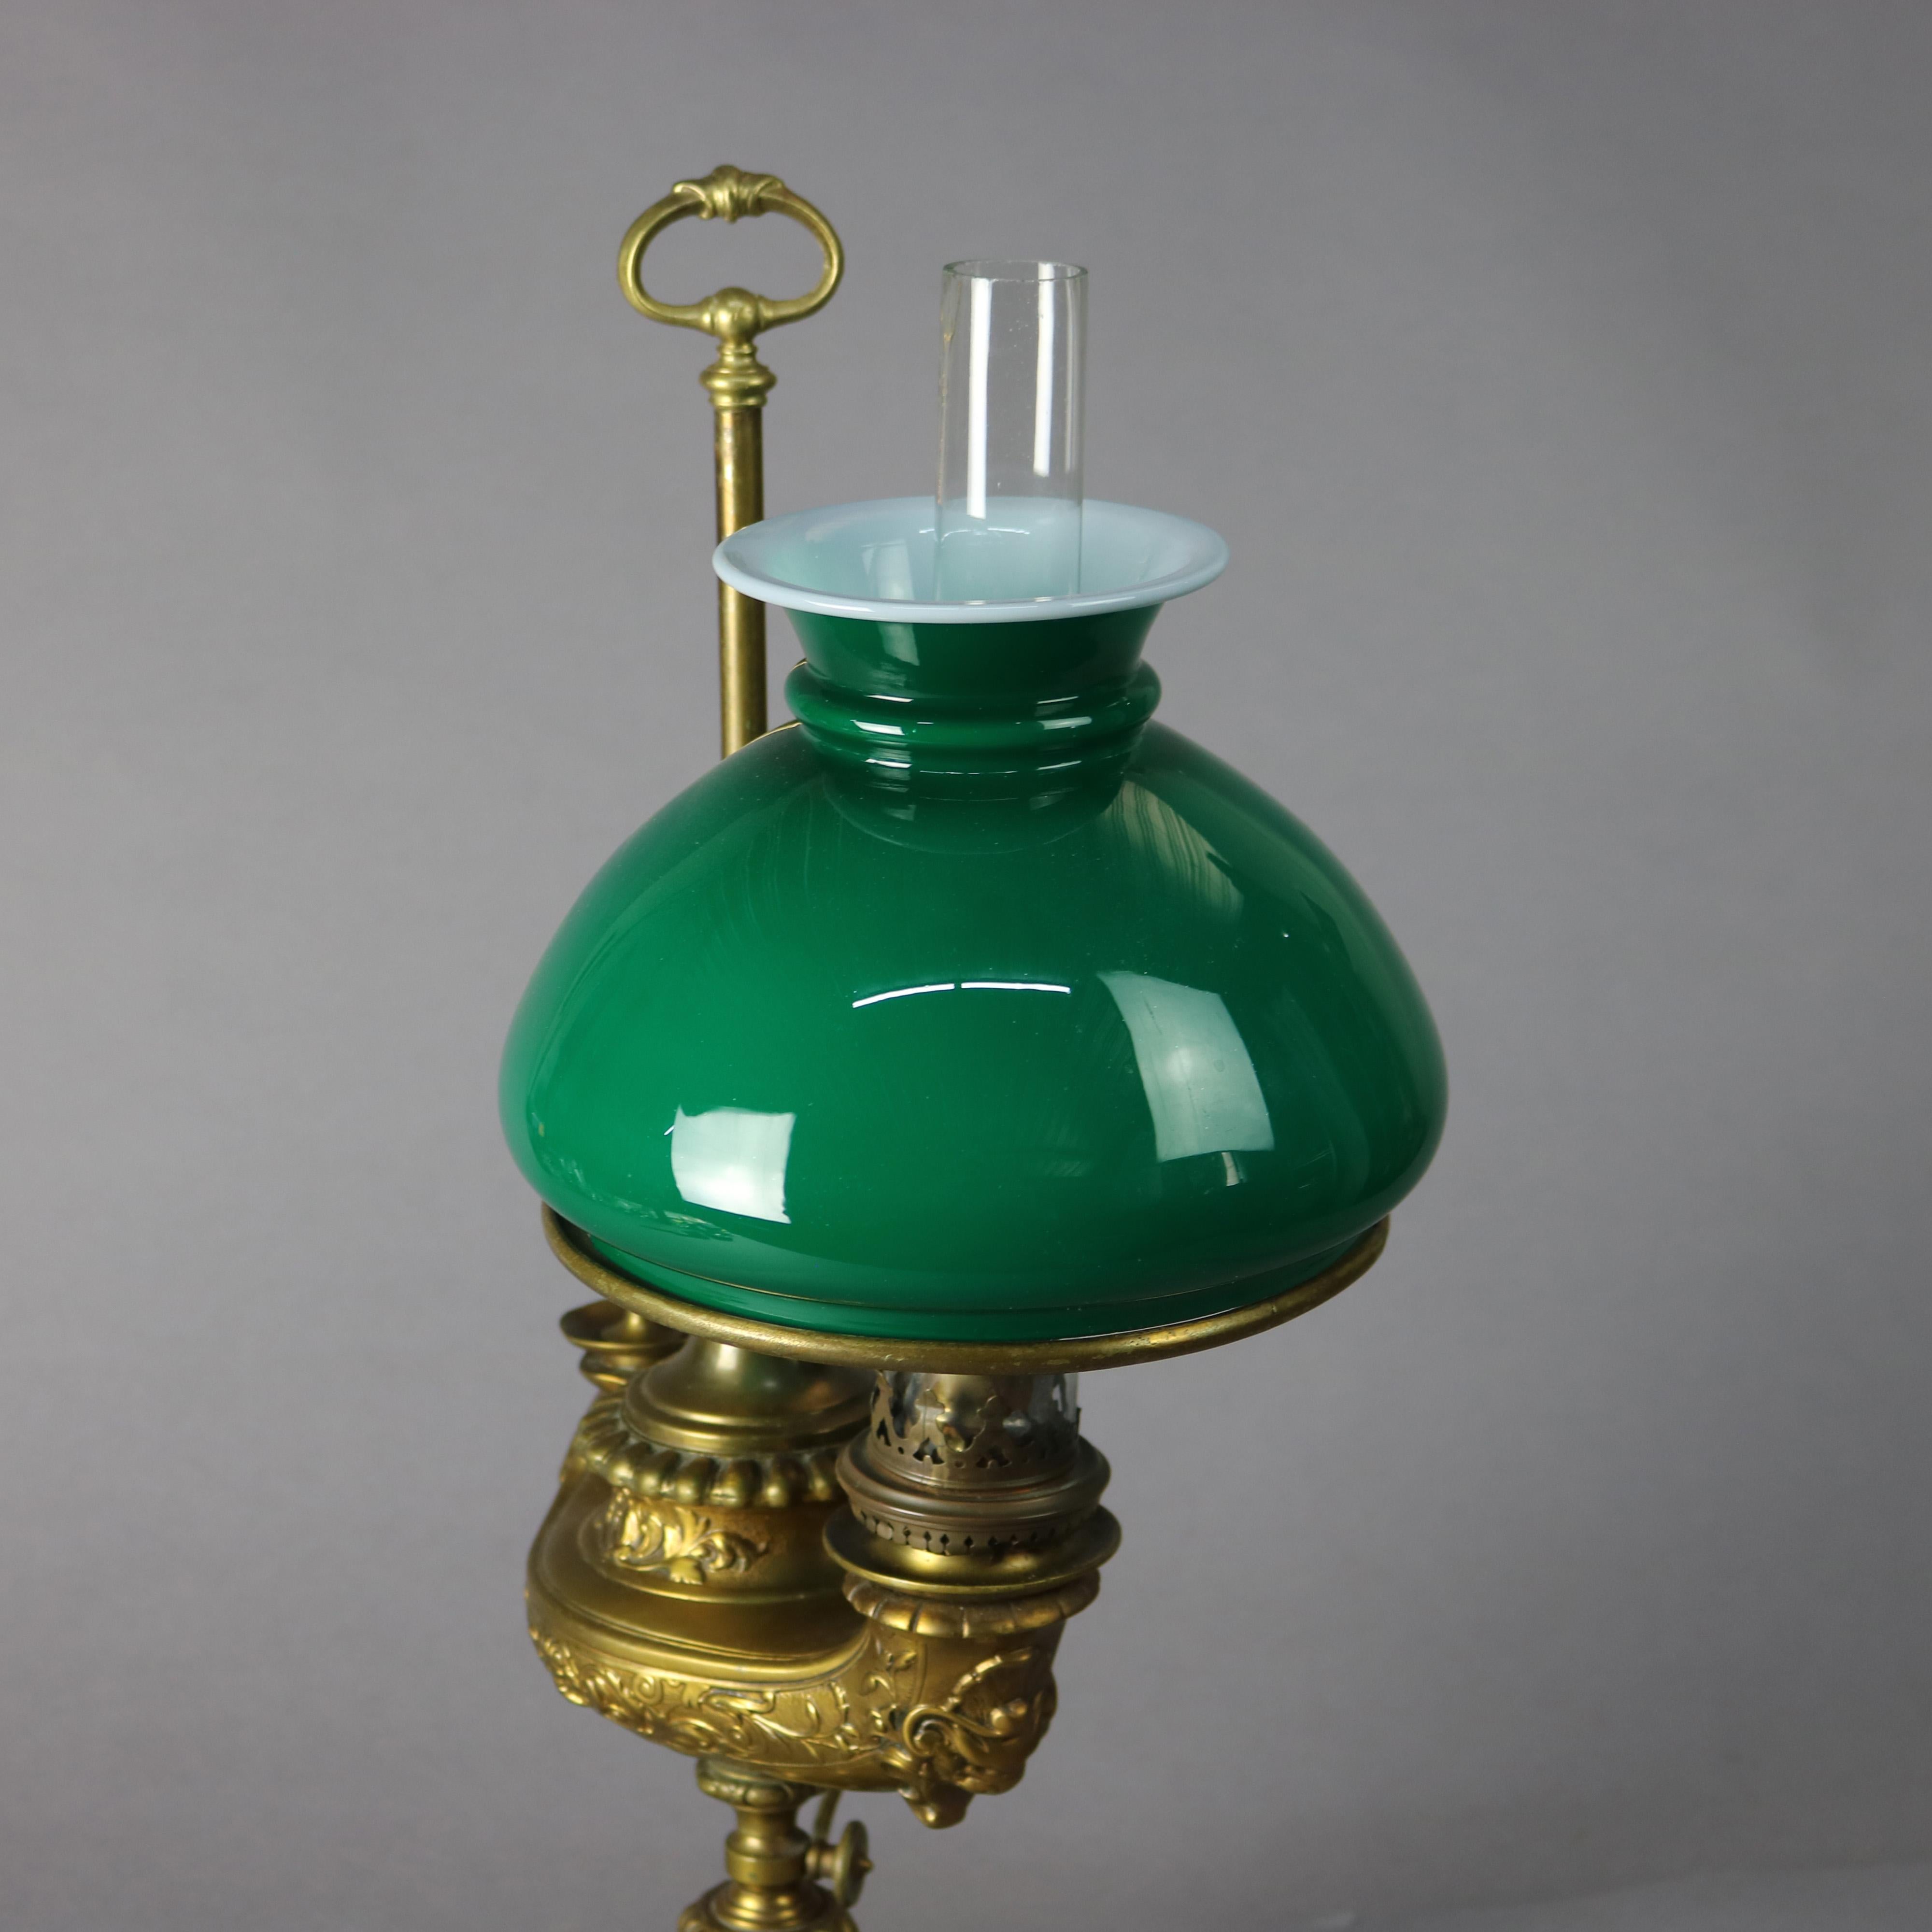 American Antique Harvard Student Lamp with Emeralite Shade Alladin Lamp Form 19th Century